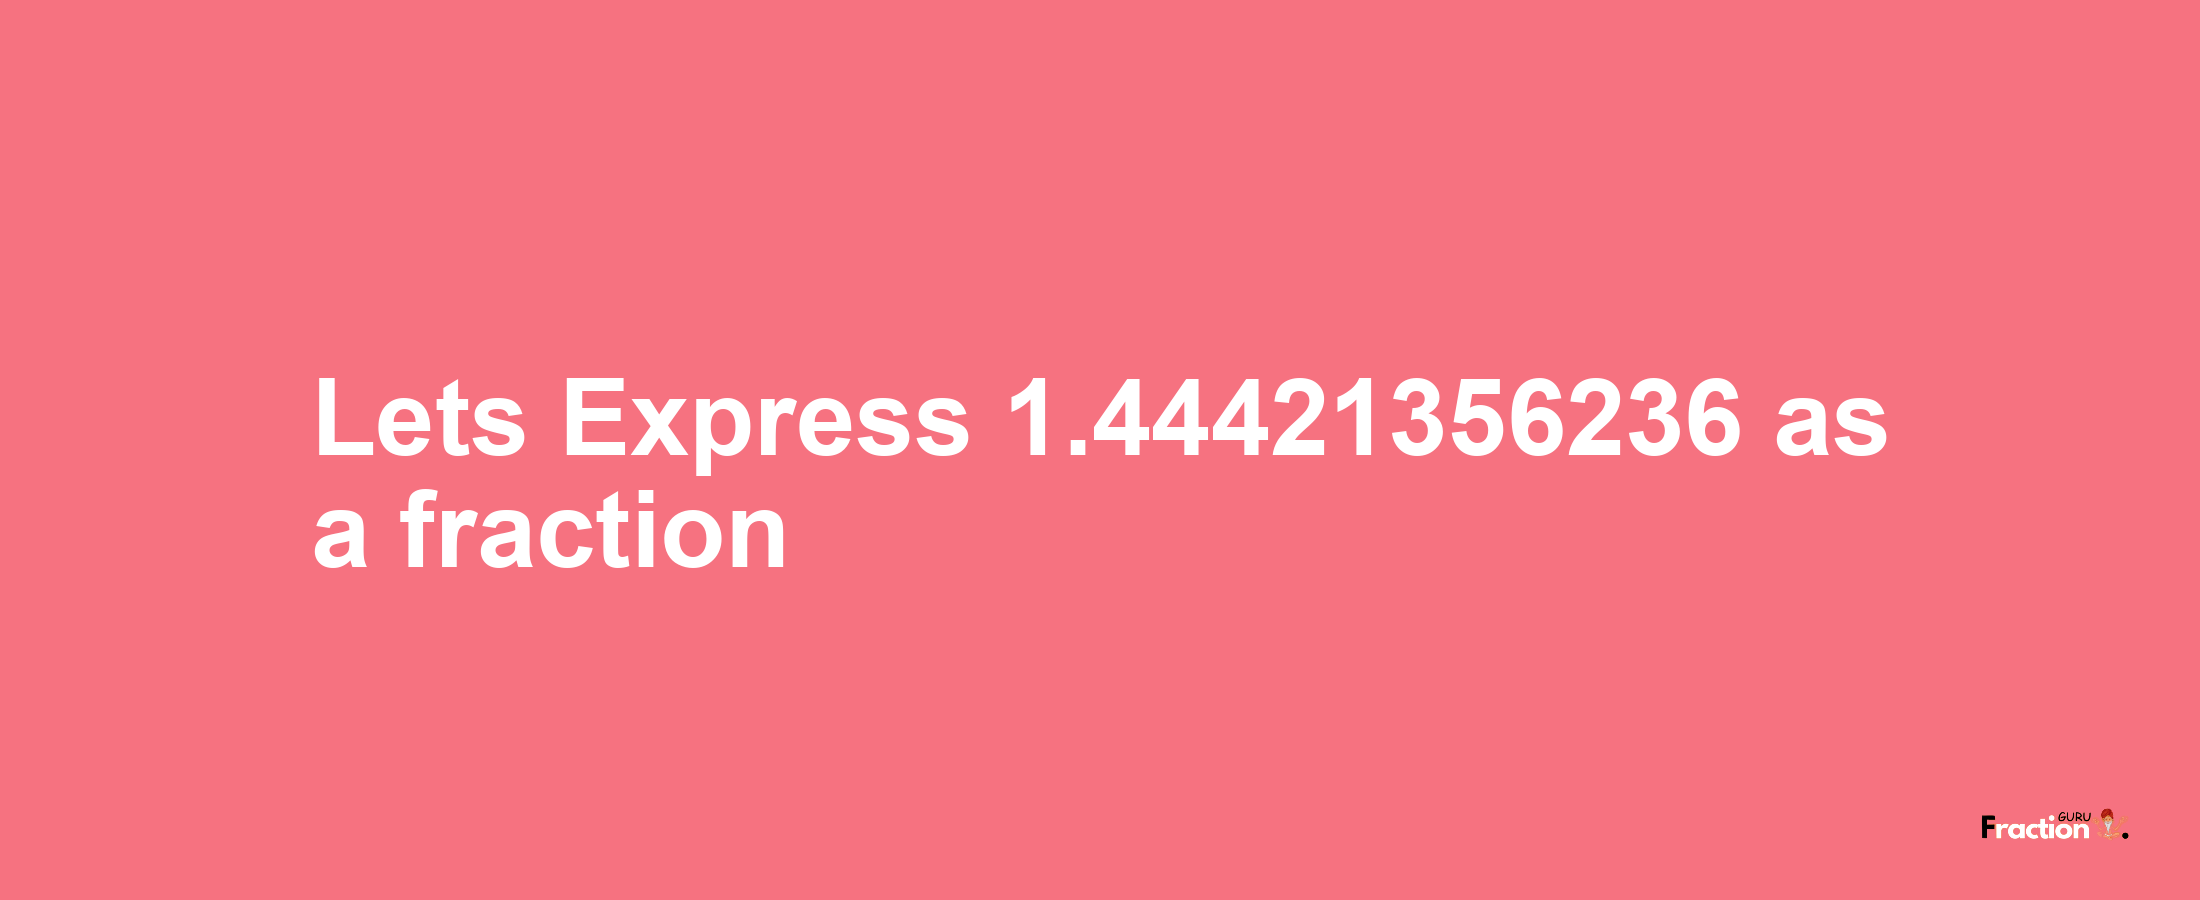 Lets Express 1.44421356236 as afraction